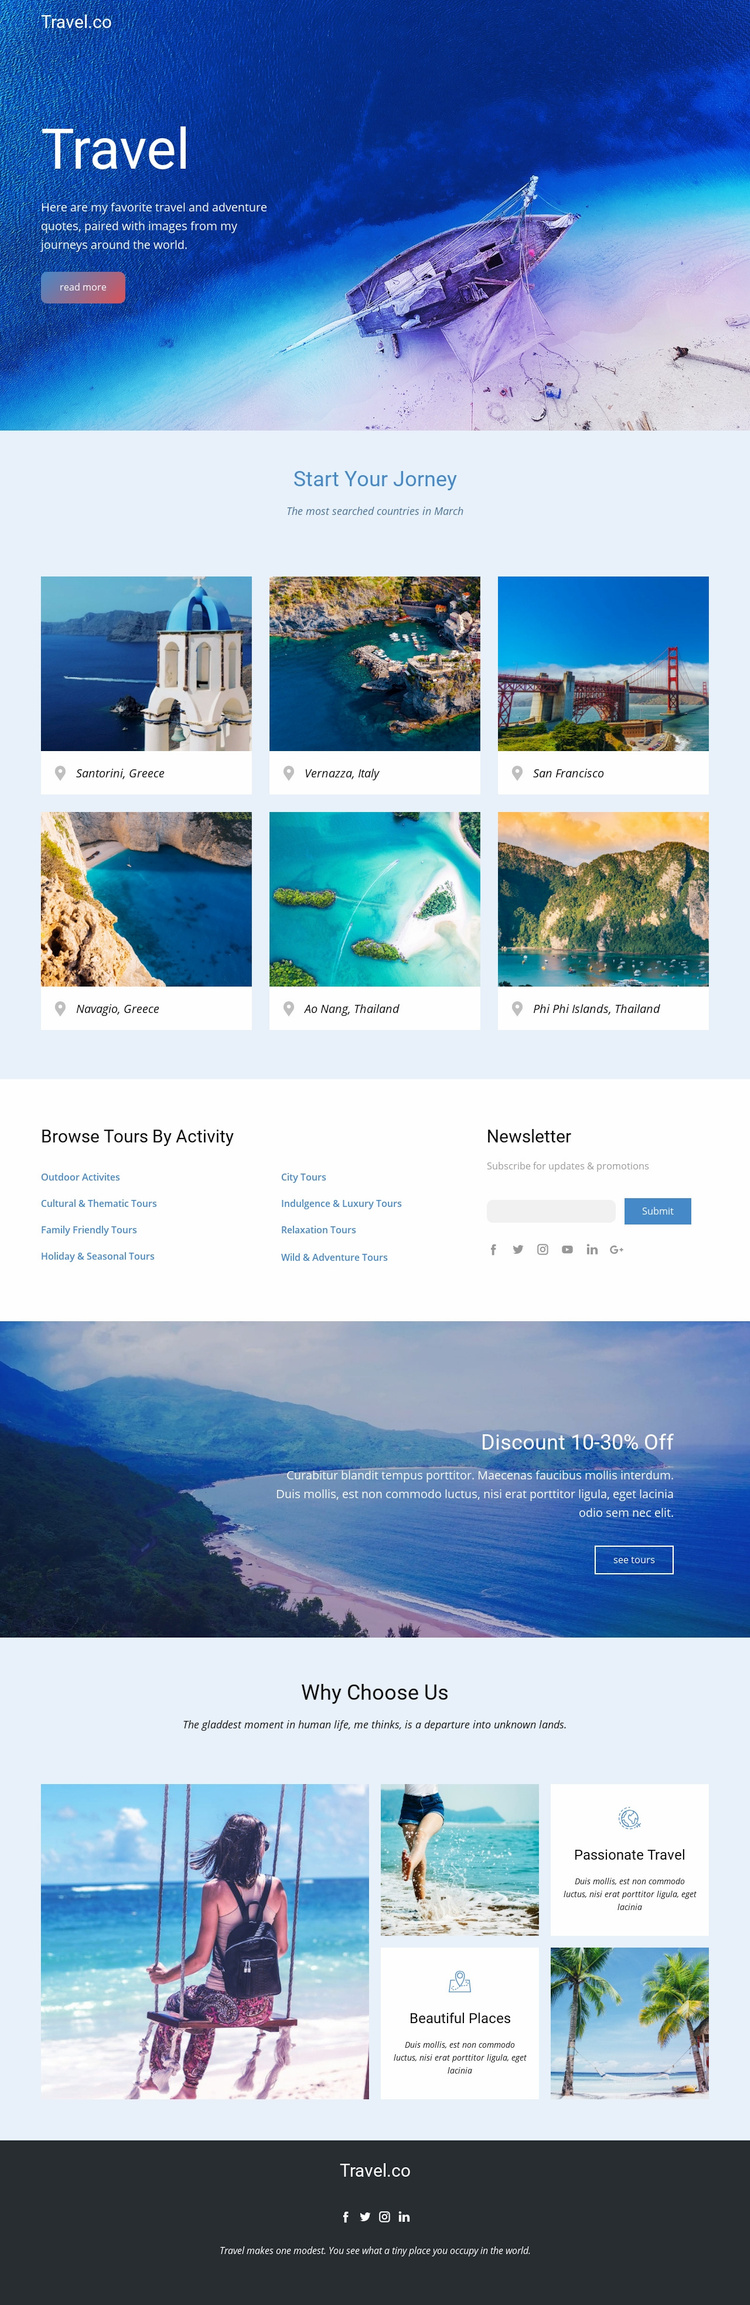 Amazing ideas for travel Wix Template Alternative